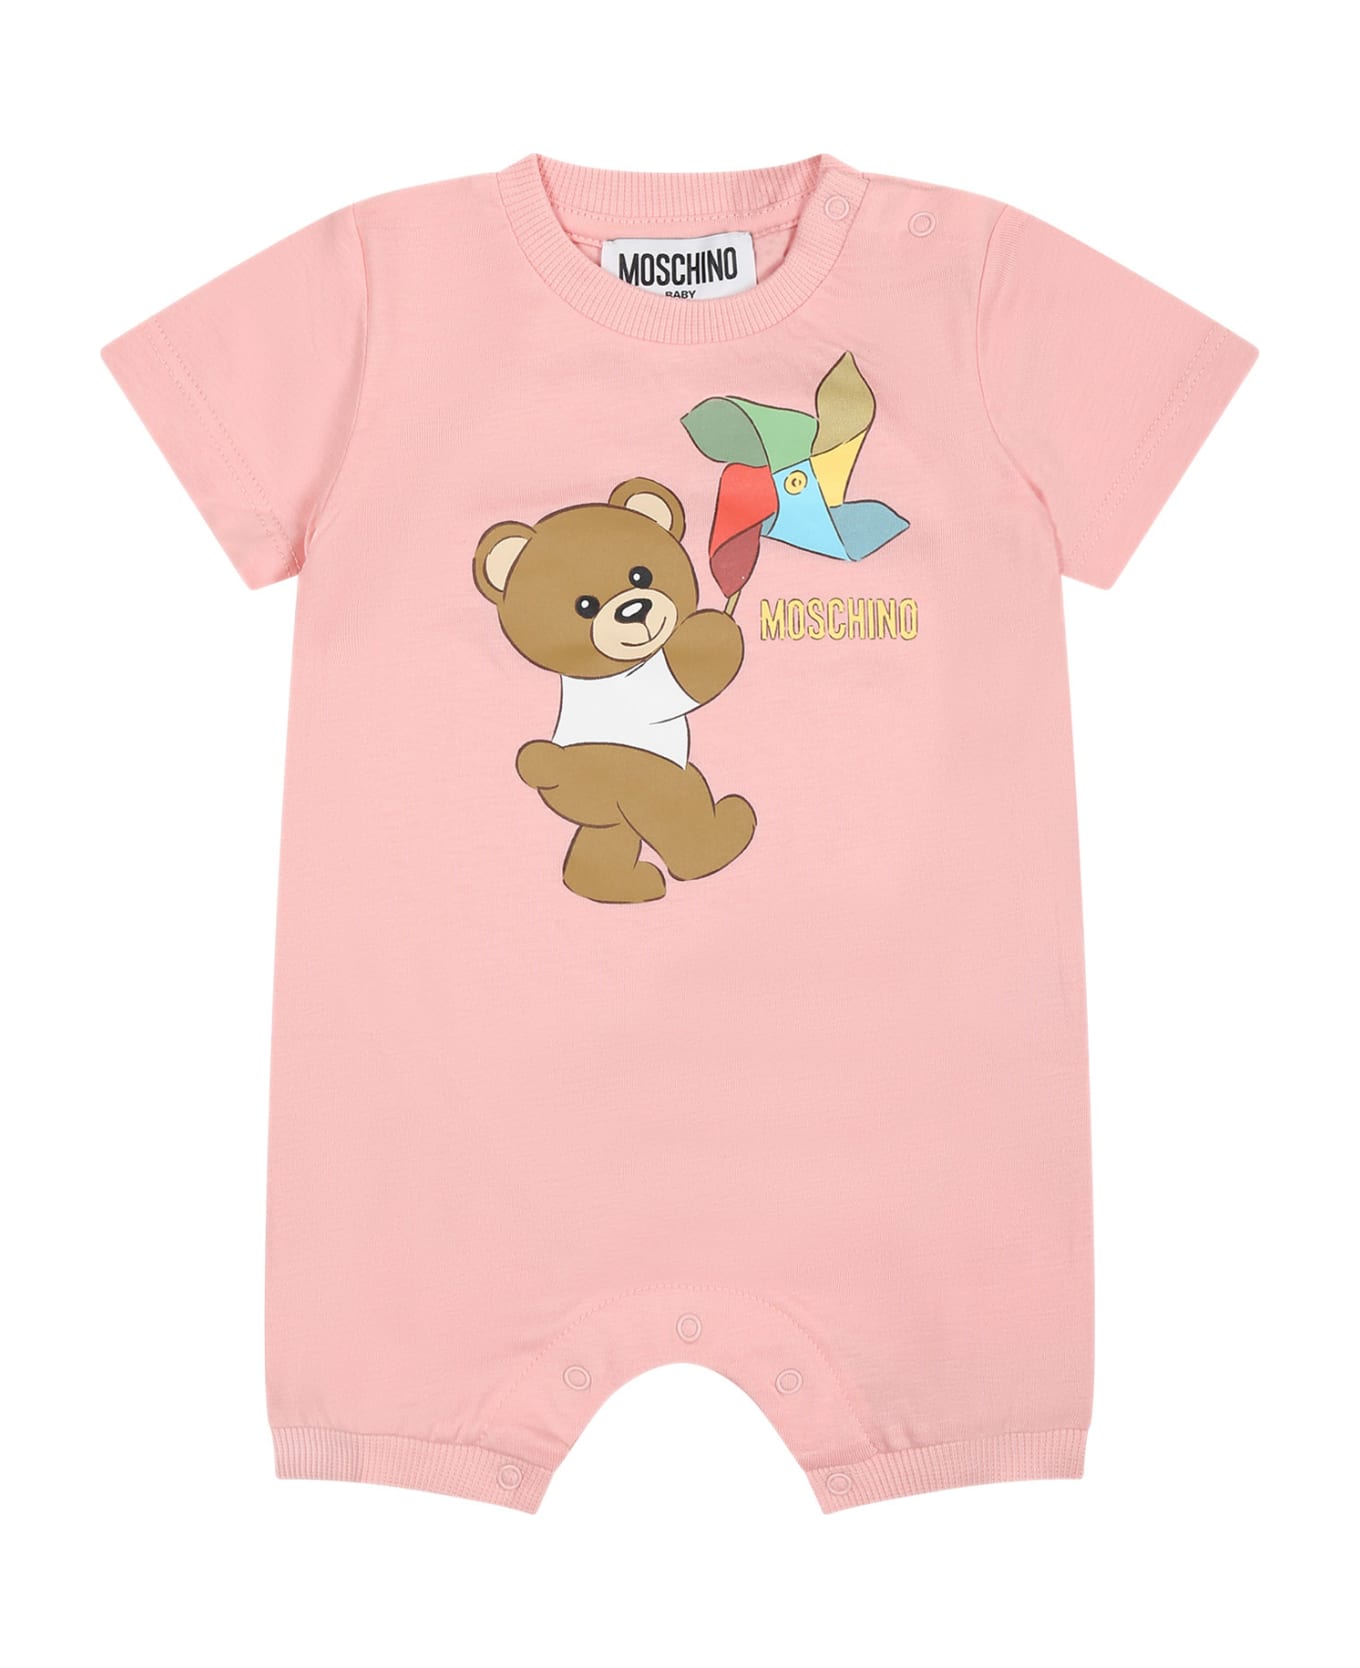 Moschino Pink Bodysuit For Babies With Teddy Bear And Pinwheel - Pink